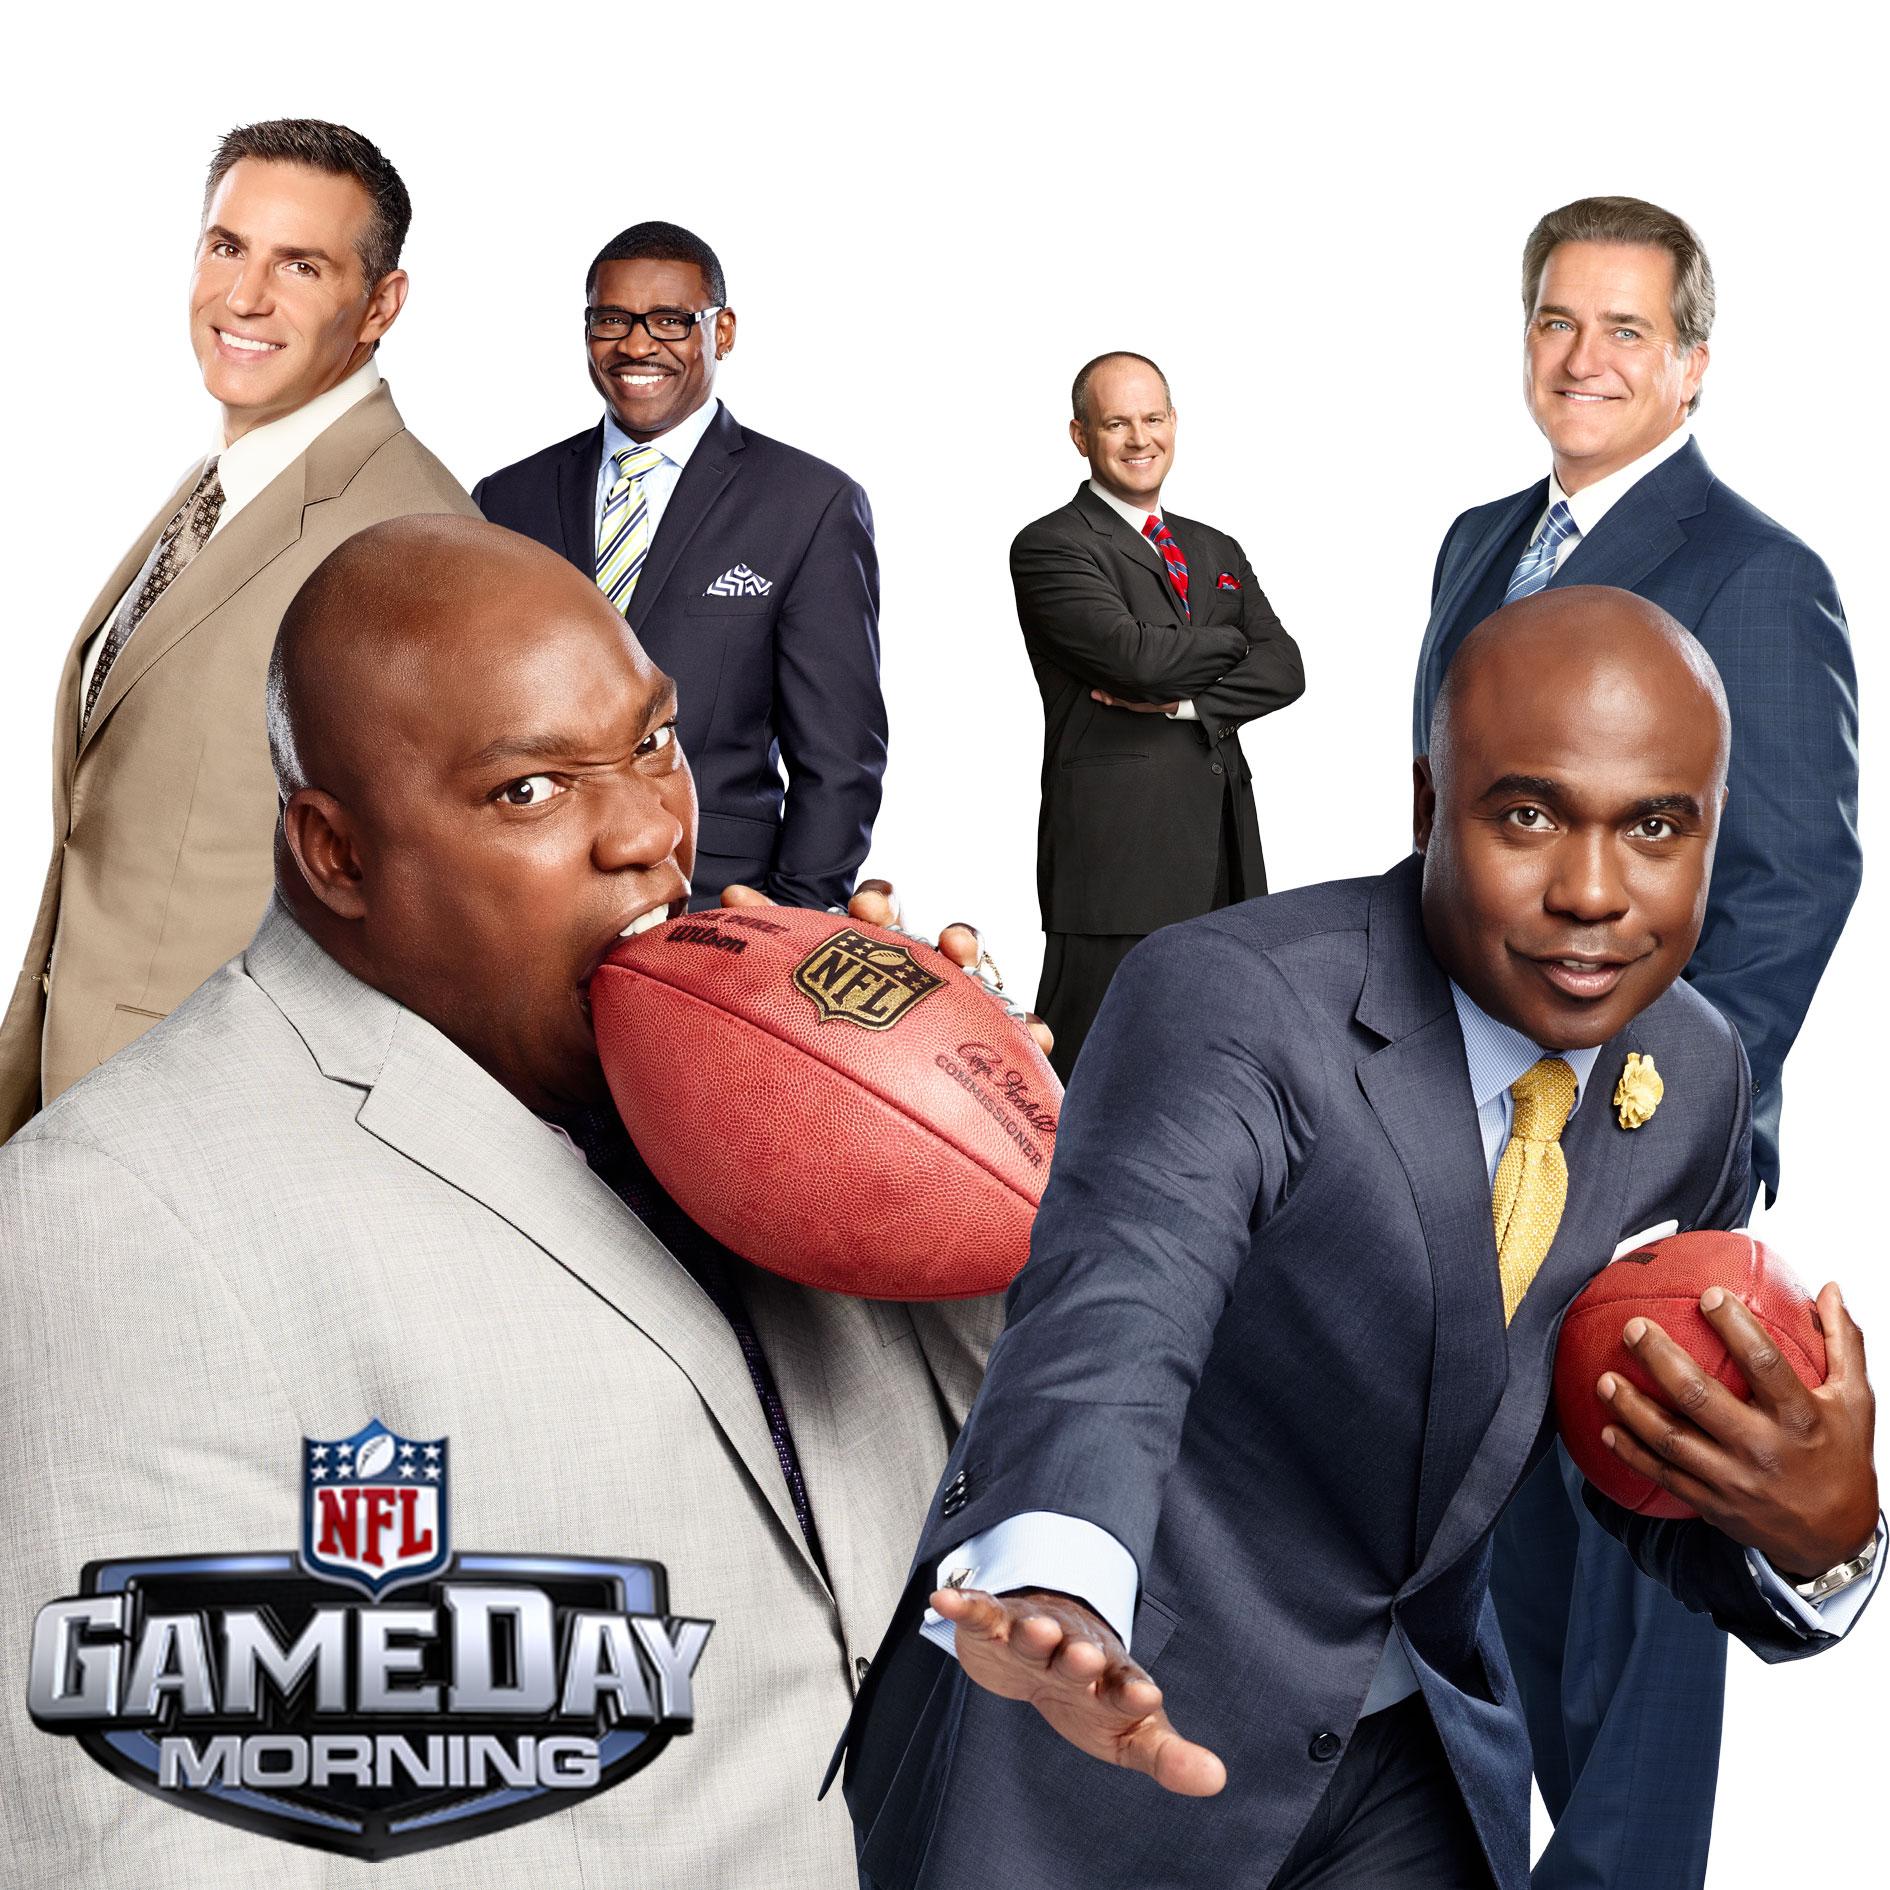 NFL Network on Twitter "GameDay Morning. Right now. Let's go! 